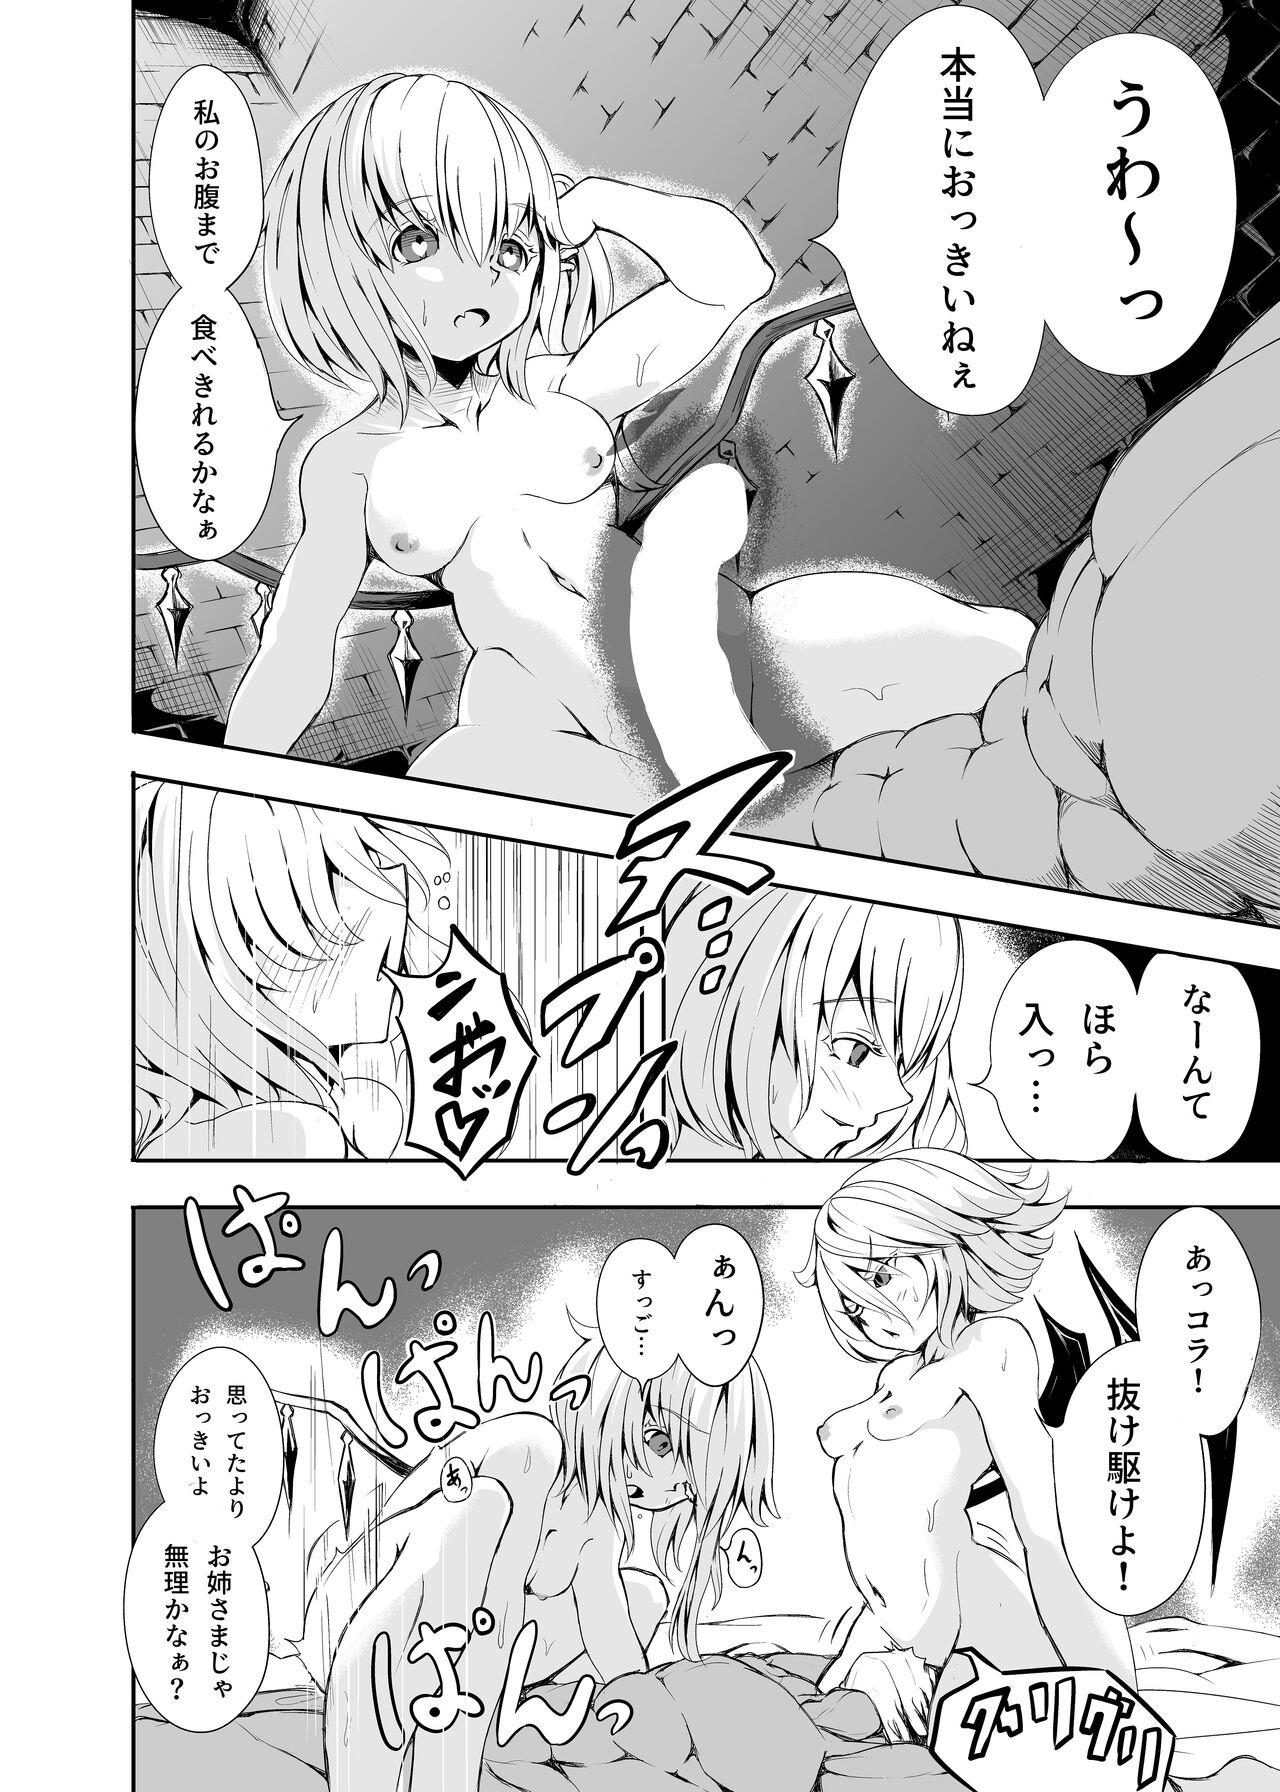 Chaturbate Meal of Vampire - Touhou project Rubdown - Page 8